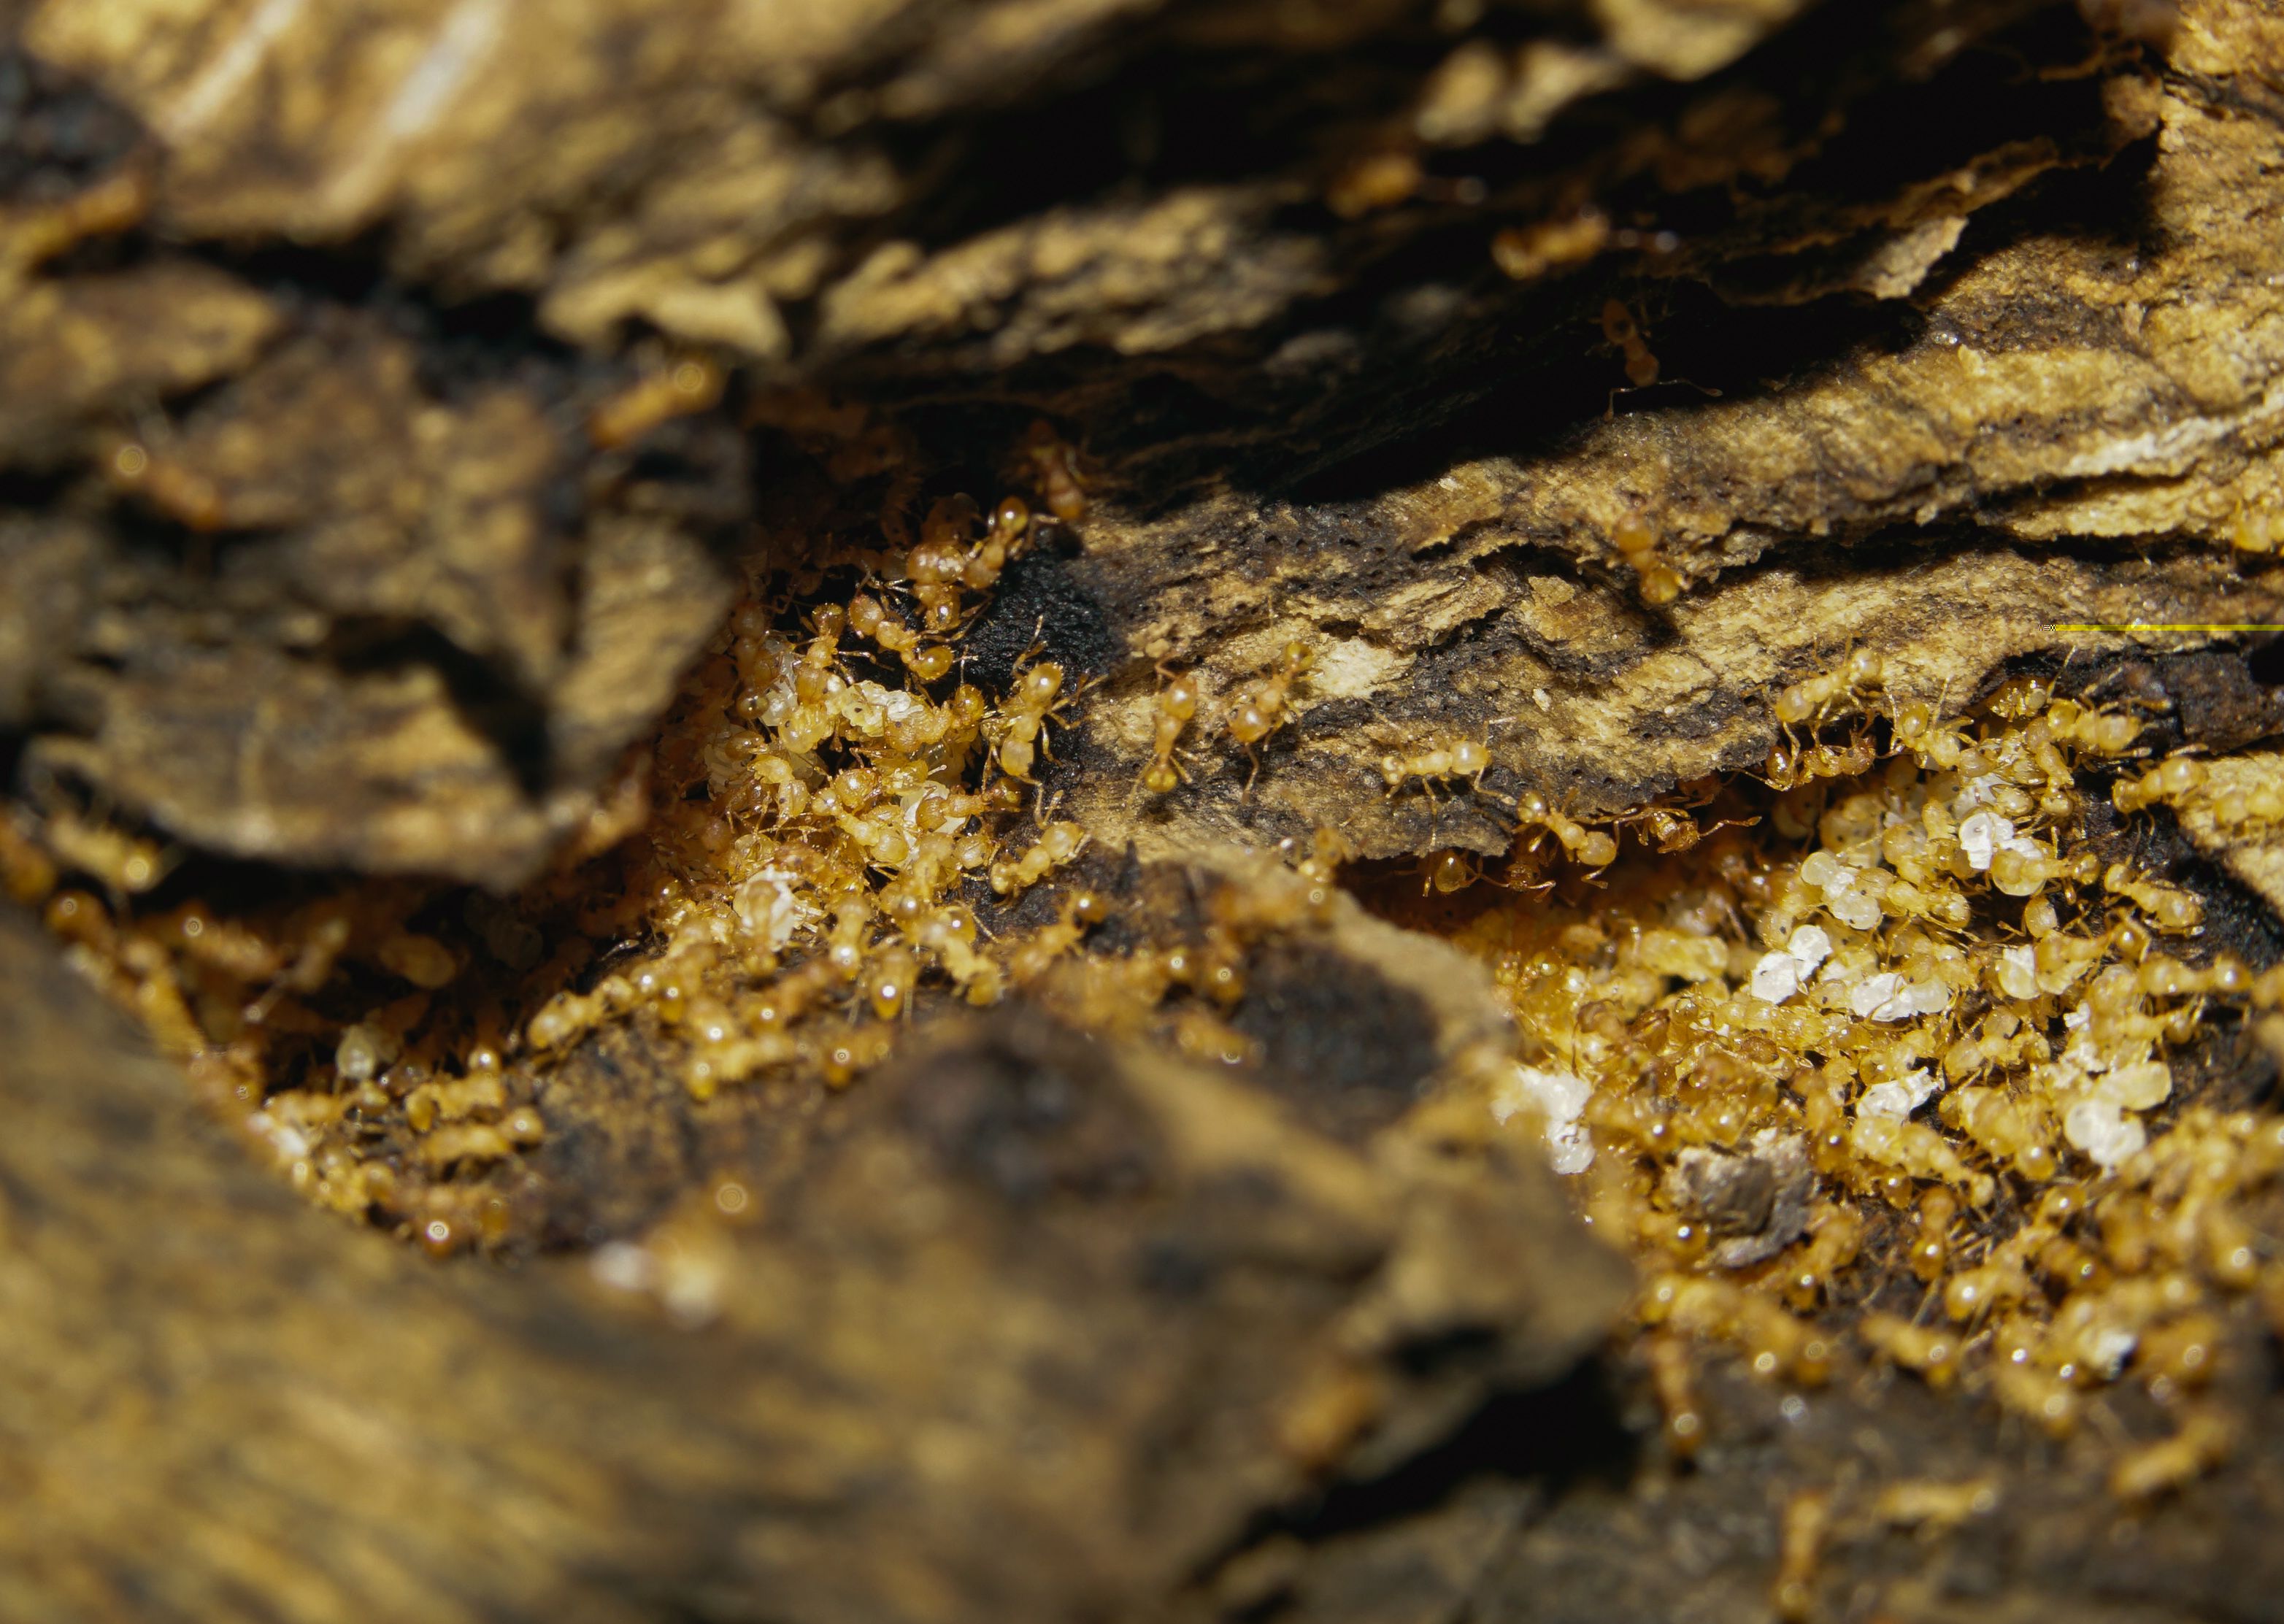 A fragment of a Wasmannia auropunctata (Roger) colony nesting within dead wood. Pale pupae can be seen among the yellow workers. 